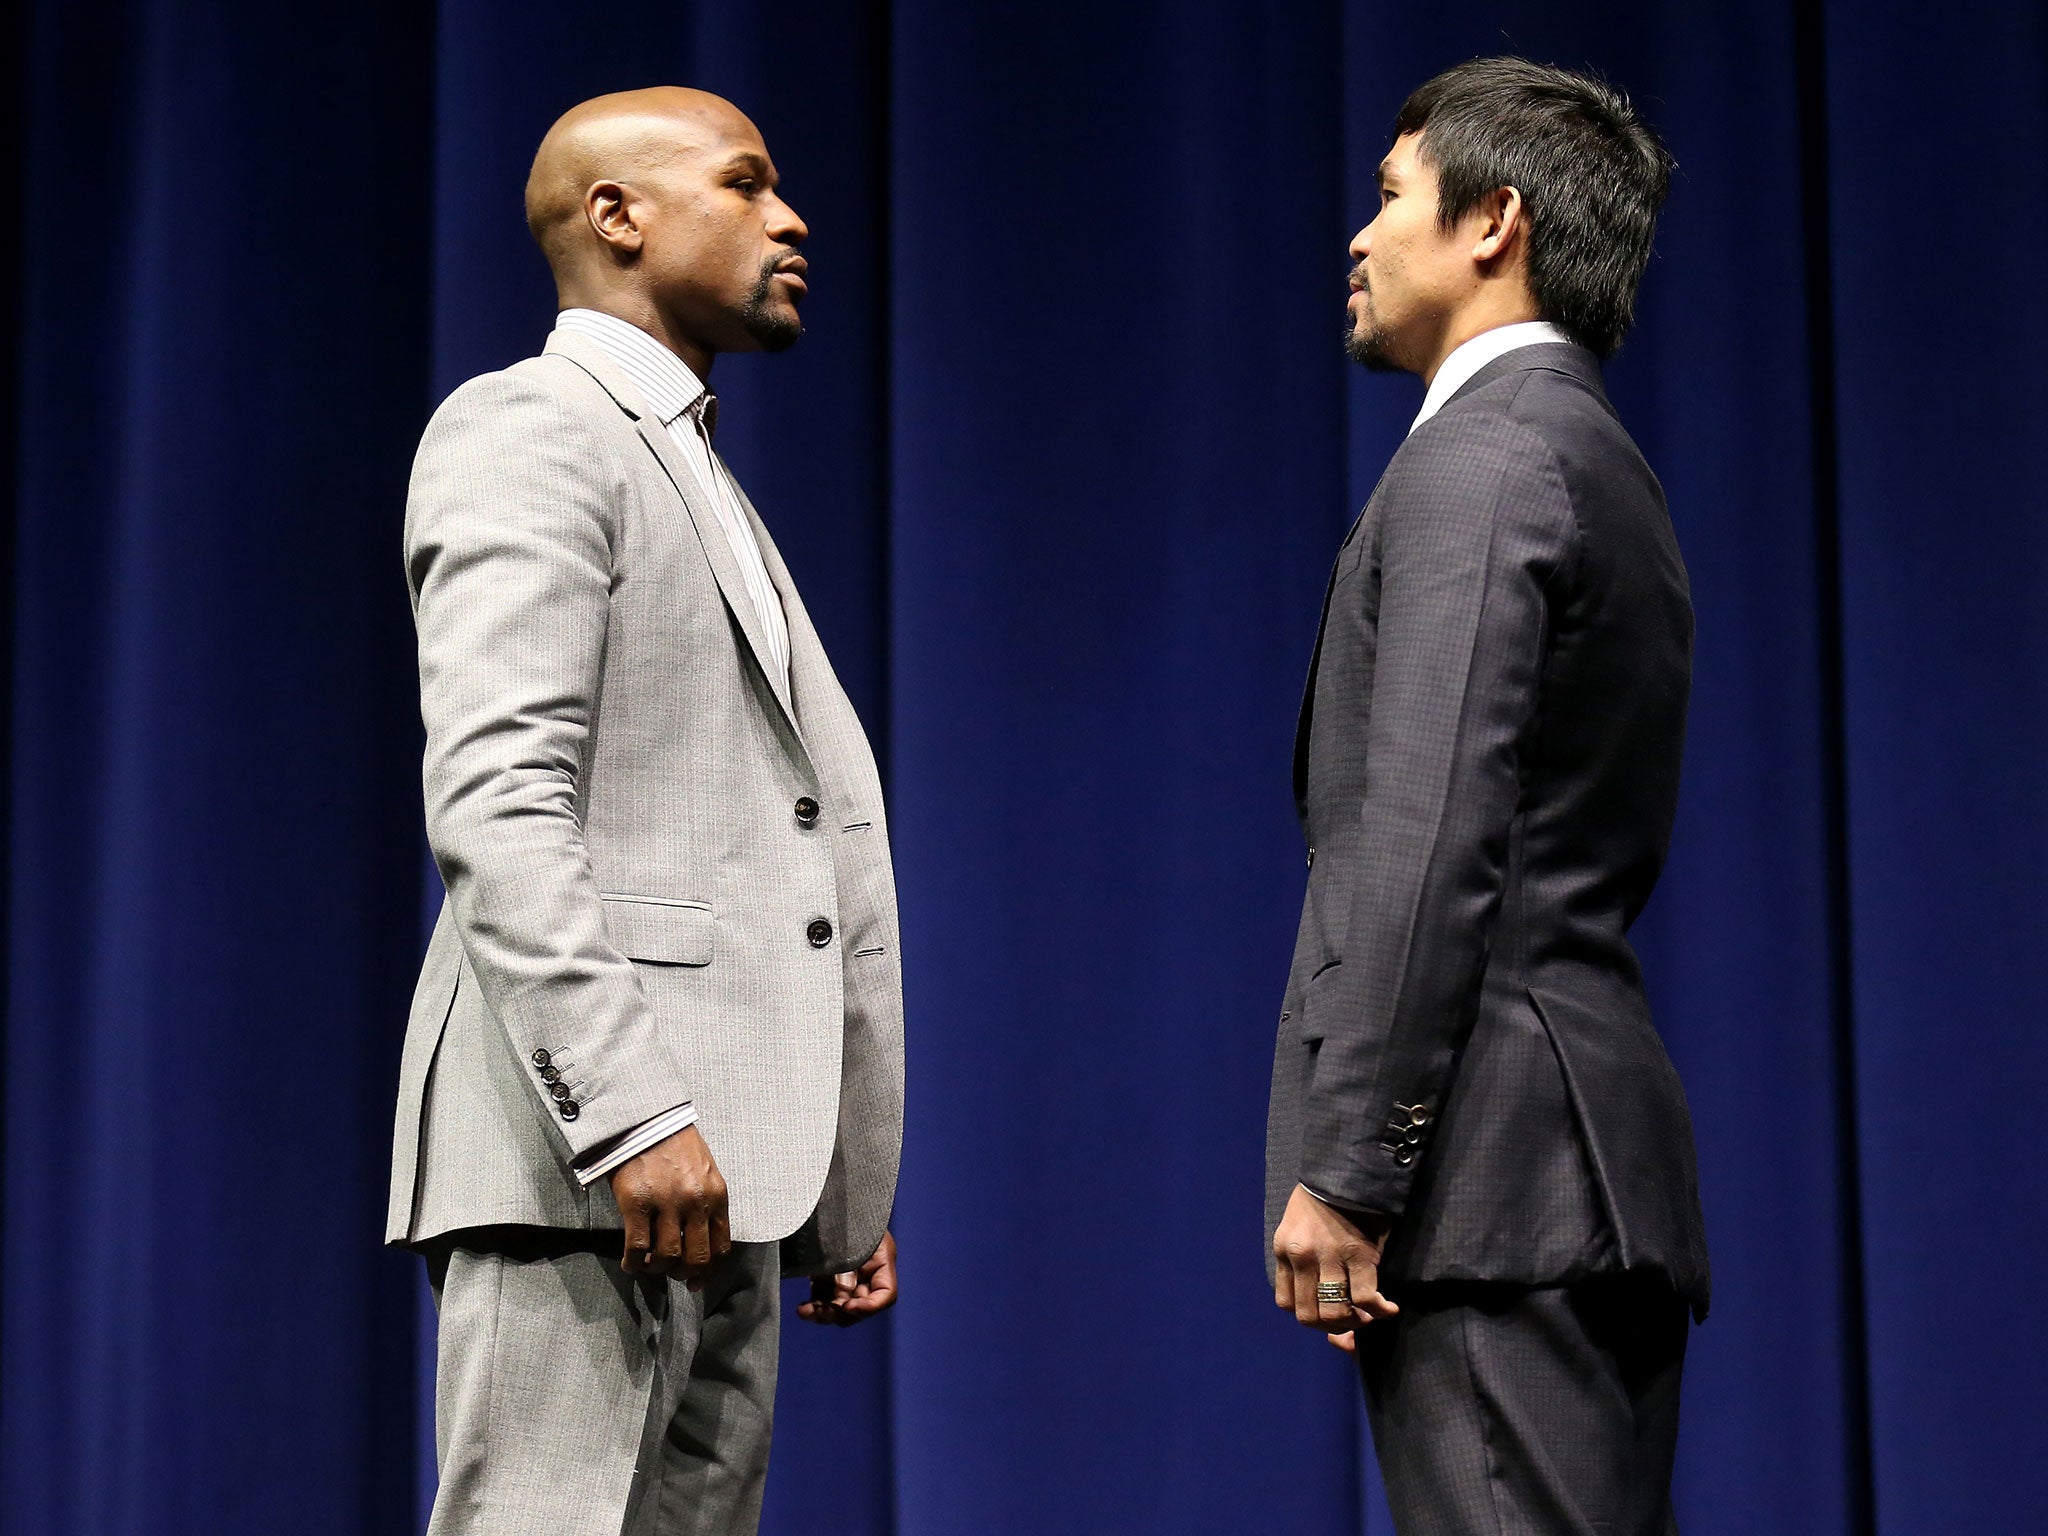 Floyd Mayweather and Manny Pacquiao go head-to-head in LA